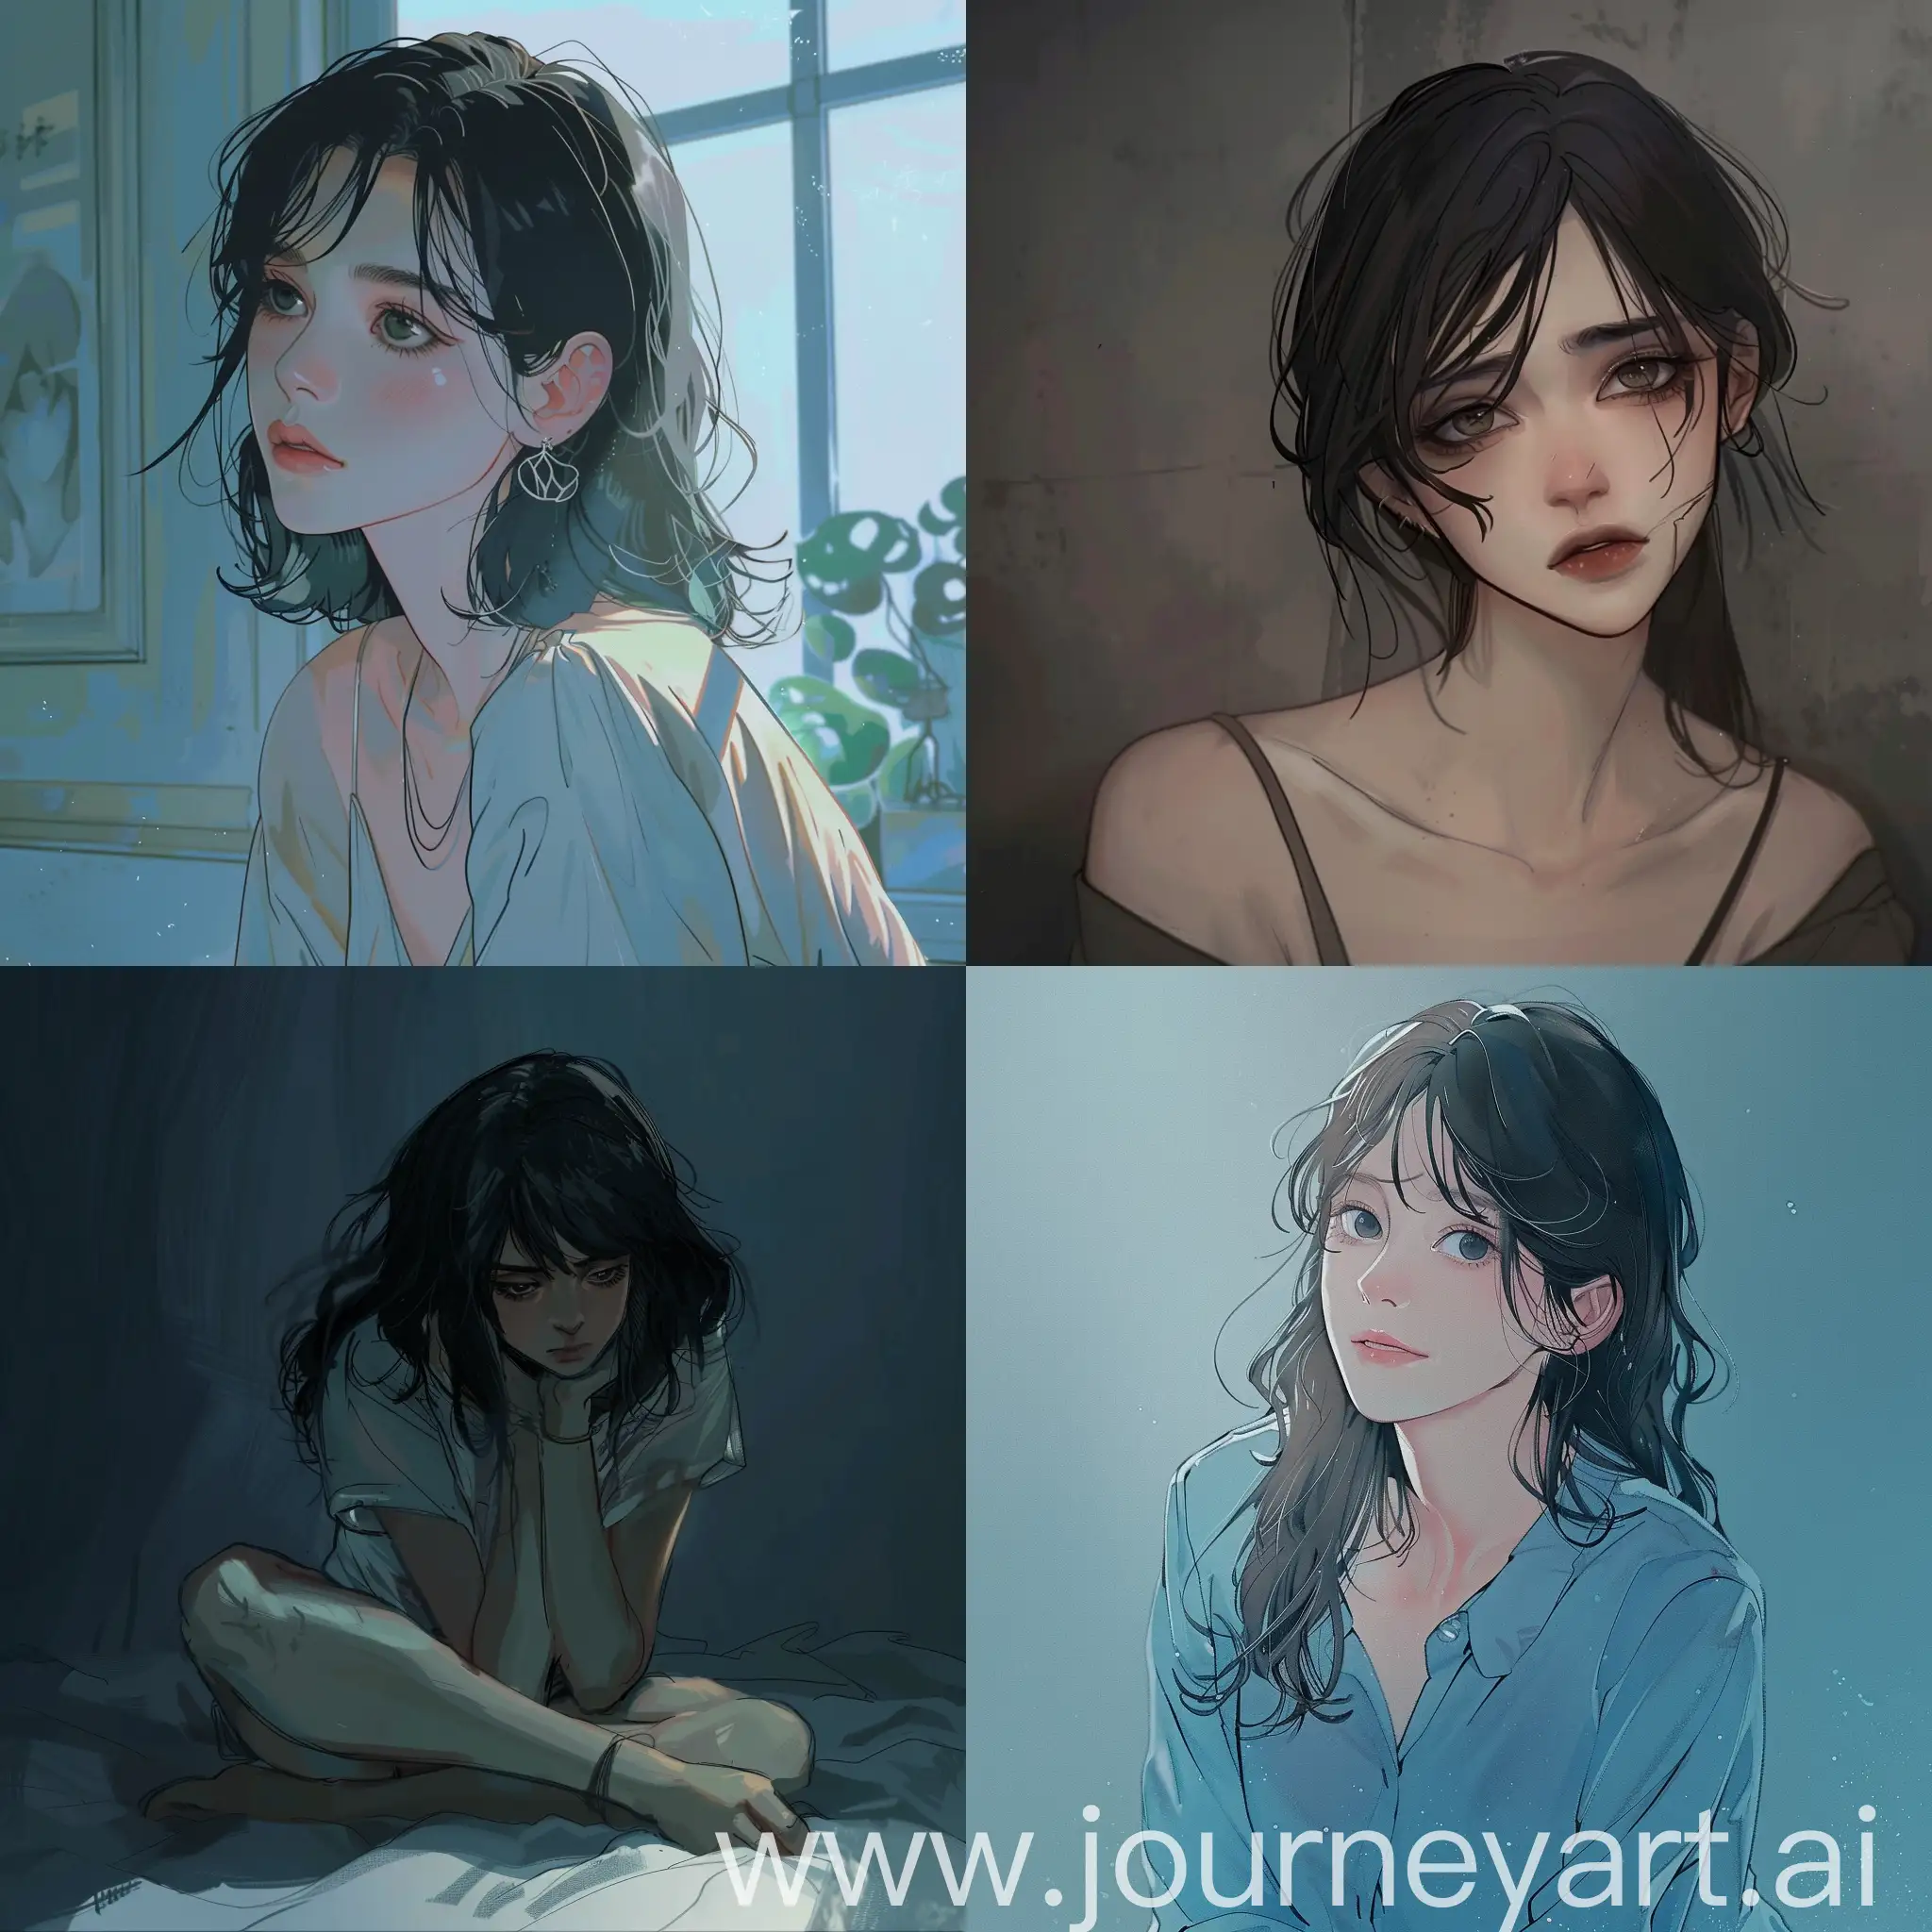 Portrait-of-a-Young-Woman-Struggling-with-SelfDeterioration